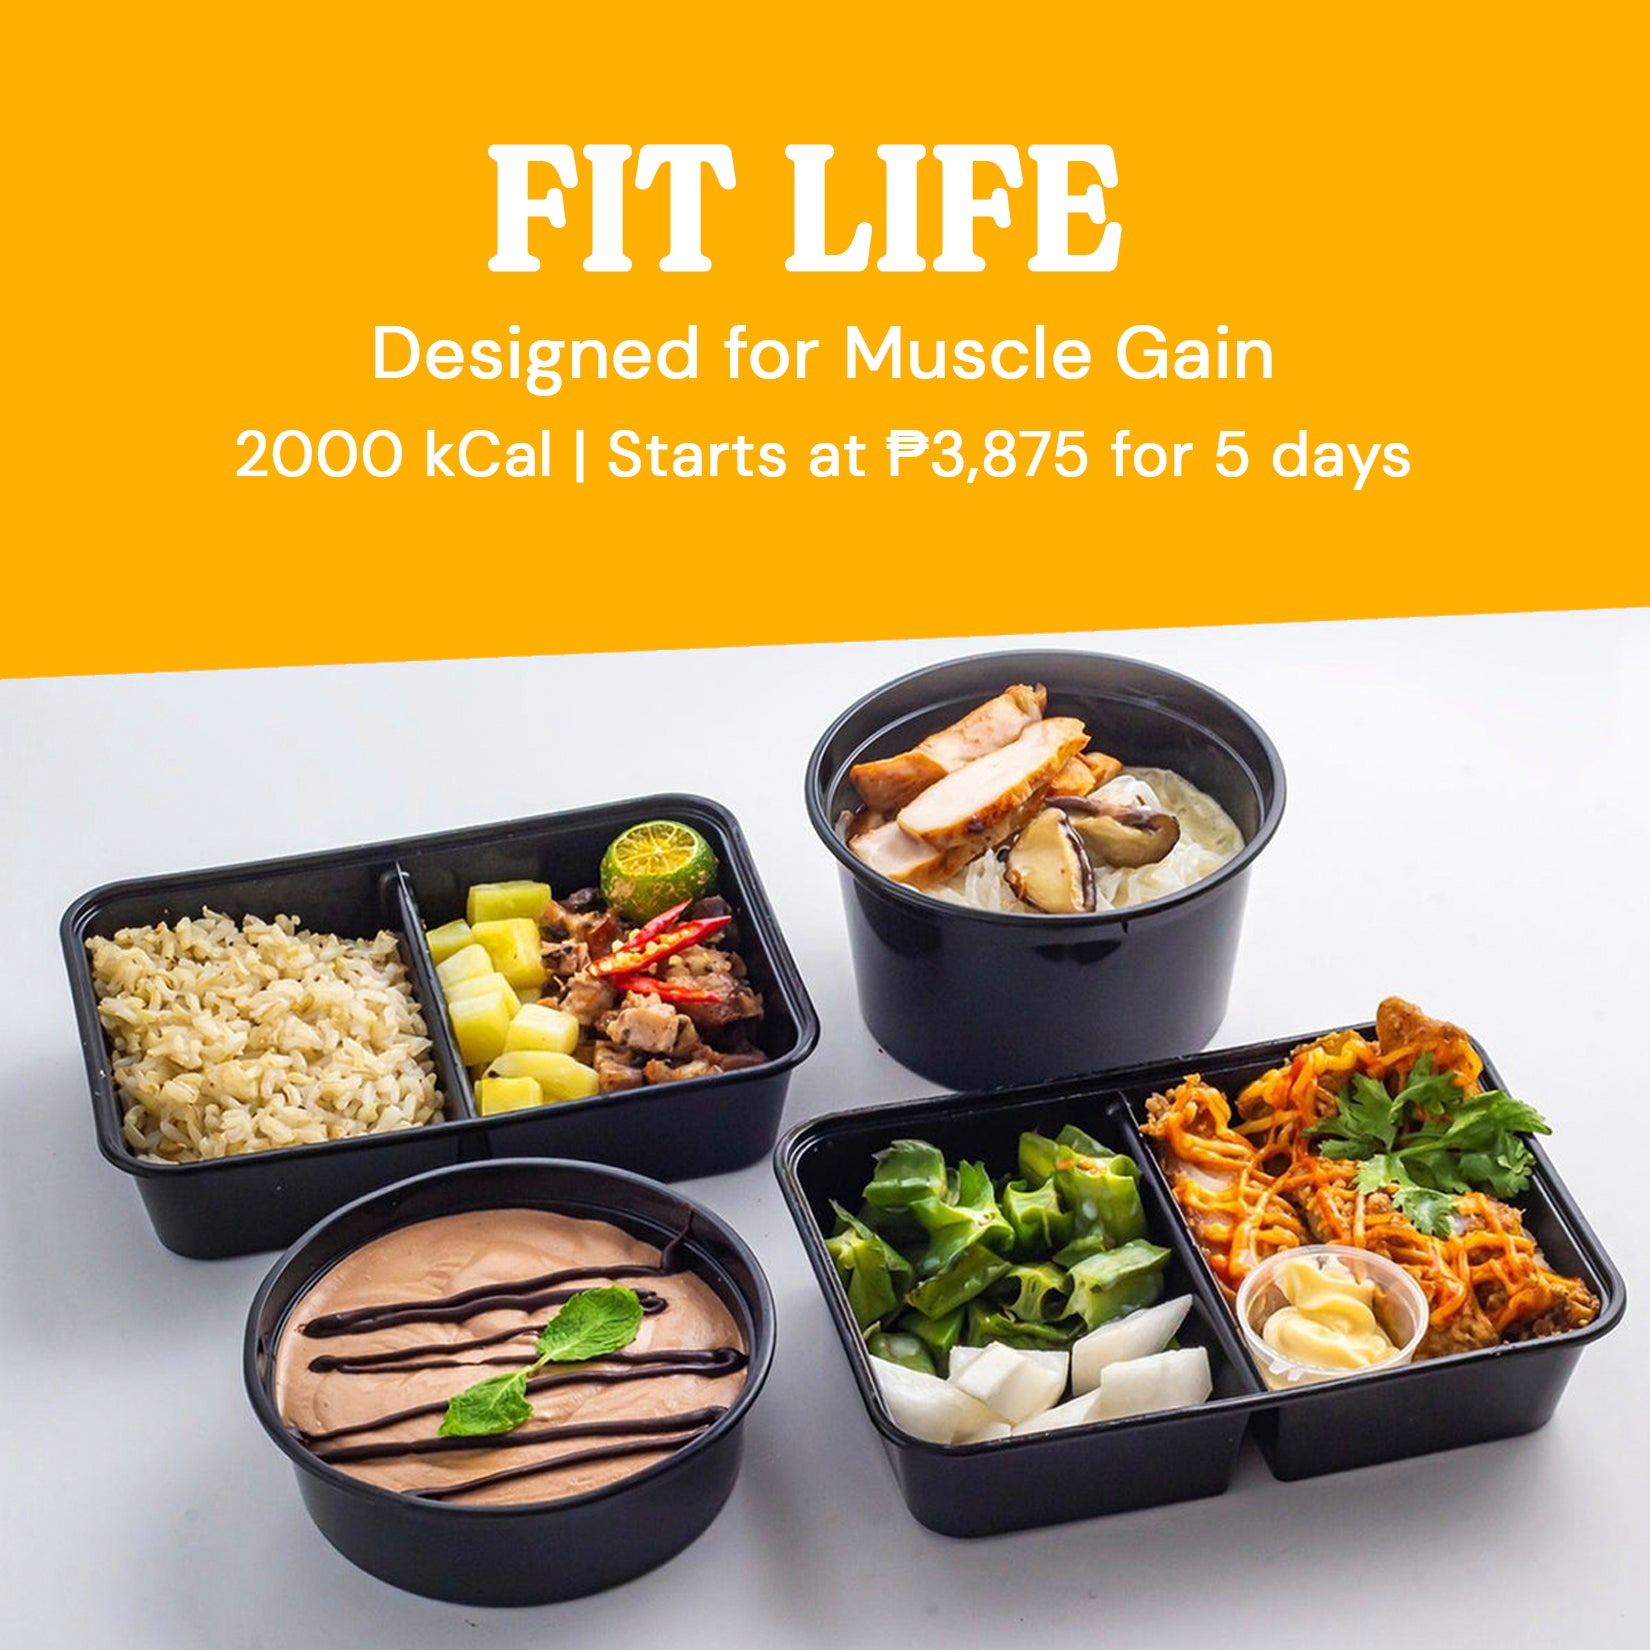 Fit Life Meal Plan